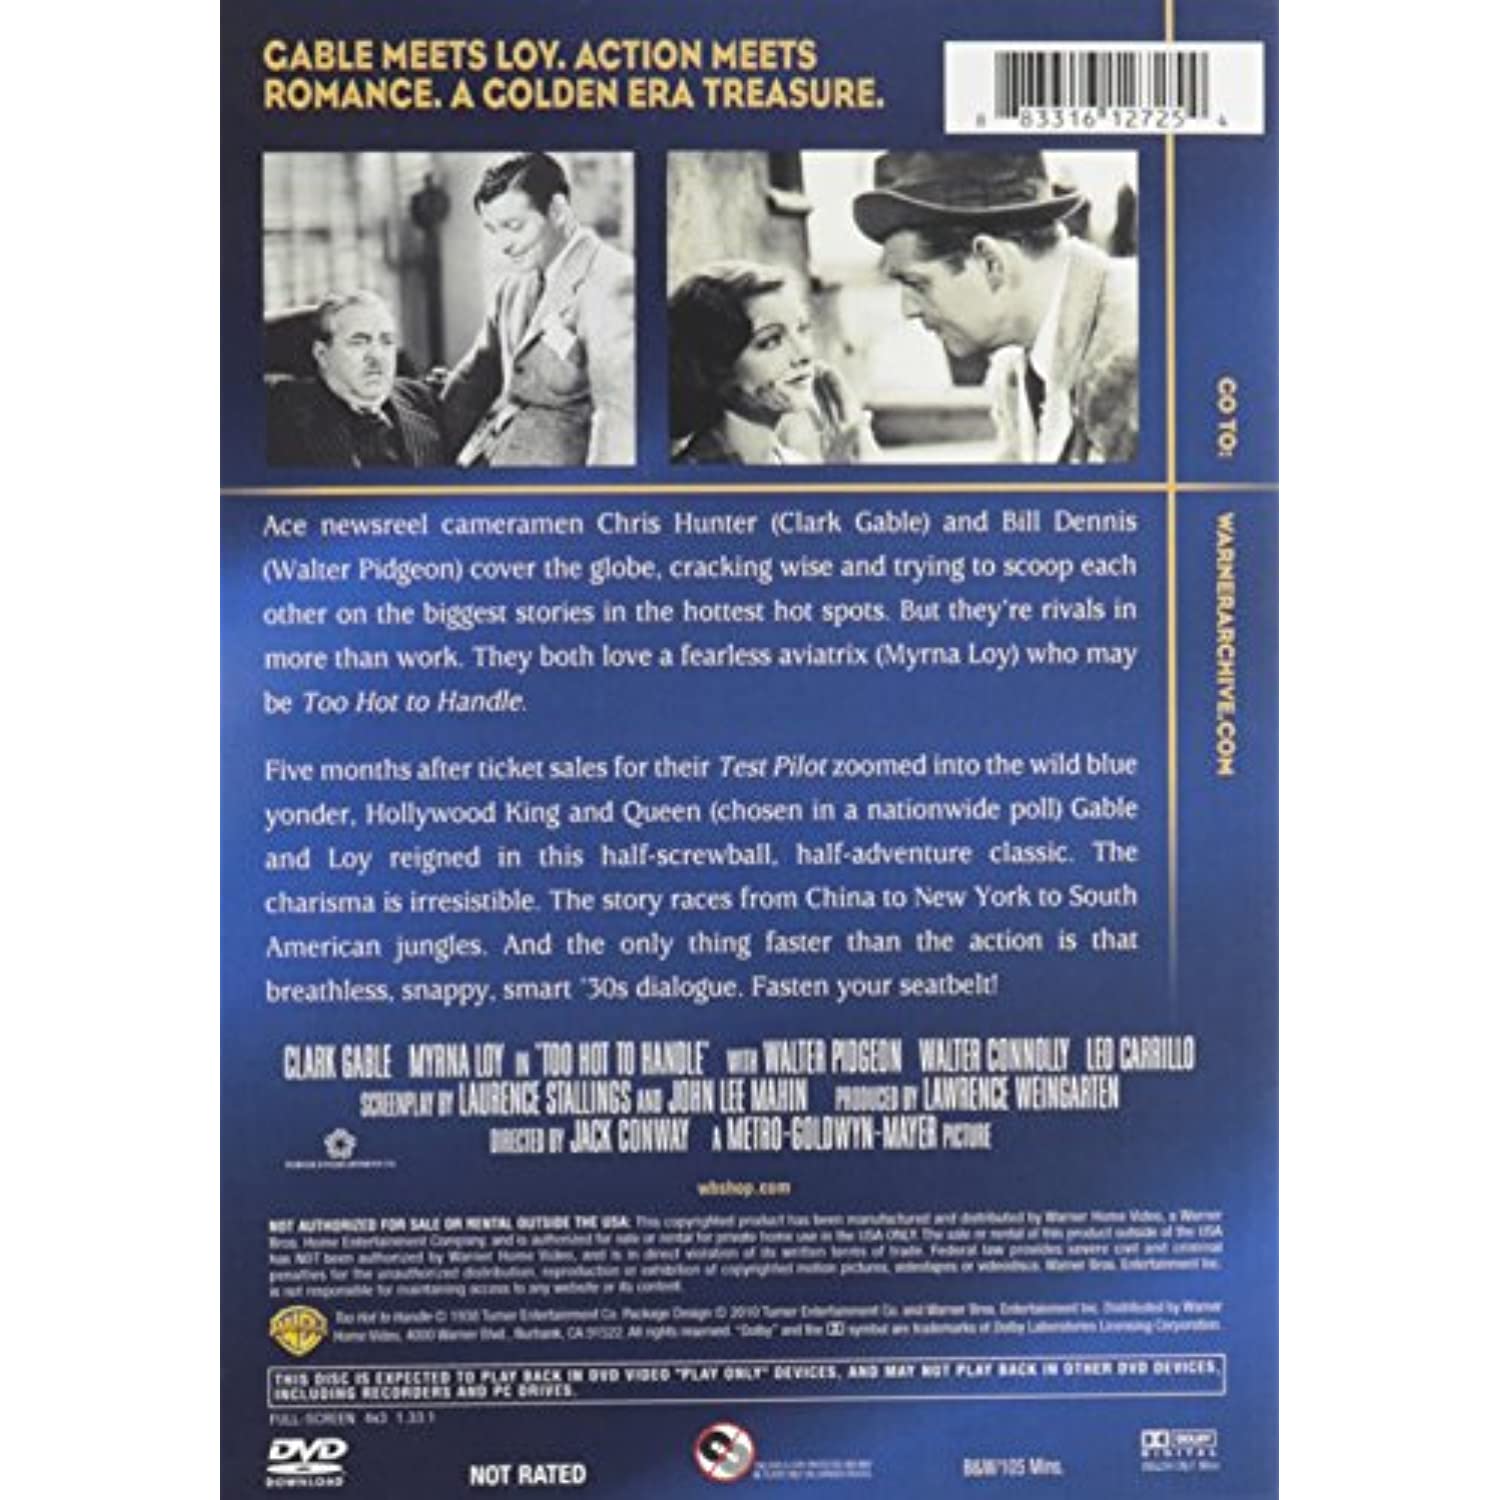 Too Hot to Handle (DVD), Warner Archives, Comedy - image 2 of 2